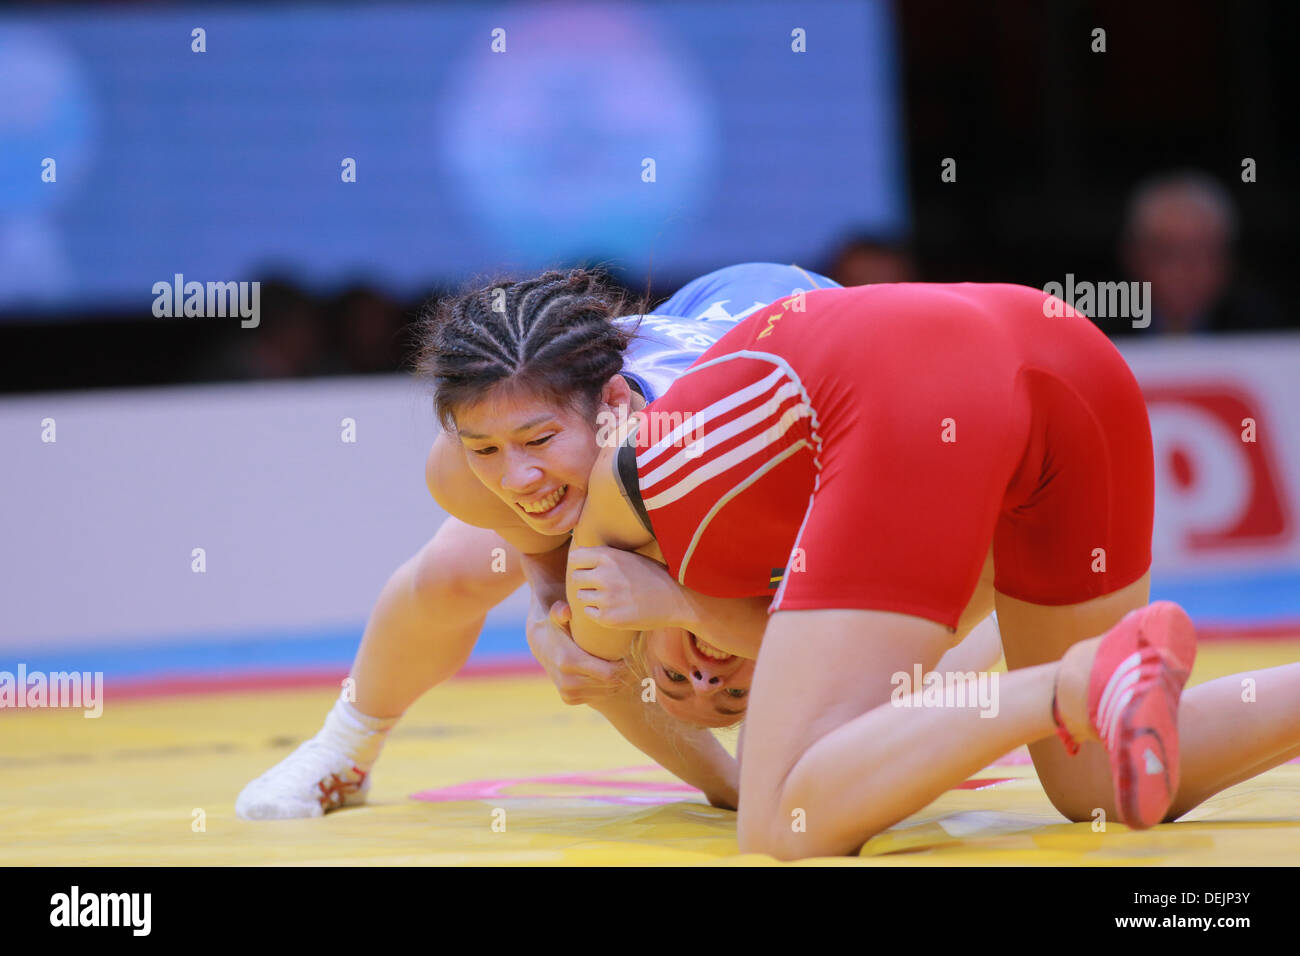 Budapest, Hungary. 19th Sep, 2013. Saori Yoshida (JPN), SEPTEMBER 19, 2013 - Wrestling : Saori Yoshida of Japan competes in the final of the women's 55kg weight category of the World Wrestling Championships in Papp Laszlo Sportsarena in Budapest, Hungary. (Photo by Sachiko Hotaka/AFLO) Credit:  Aflo Co. Ltd./Alamy Live News Stock Photo